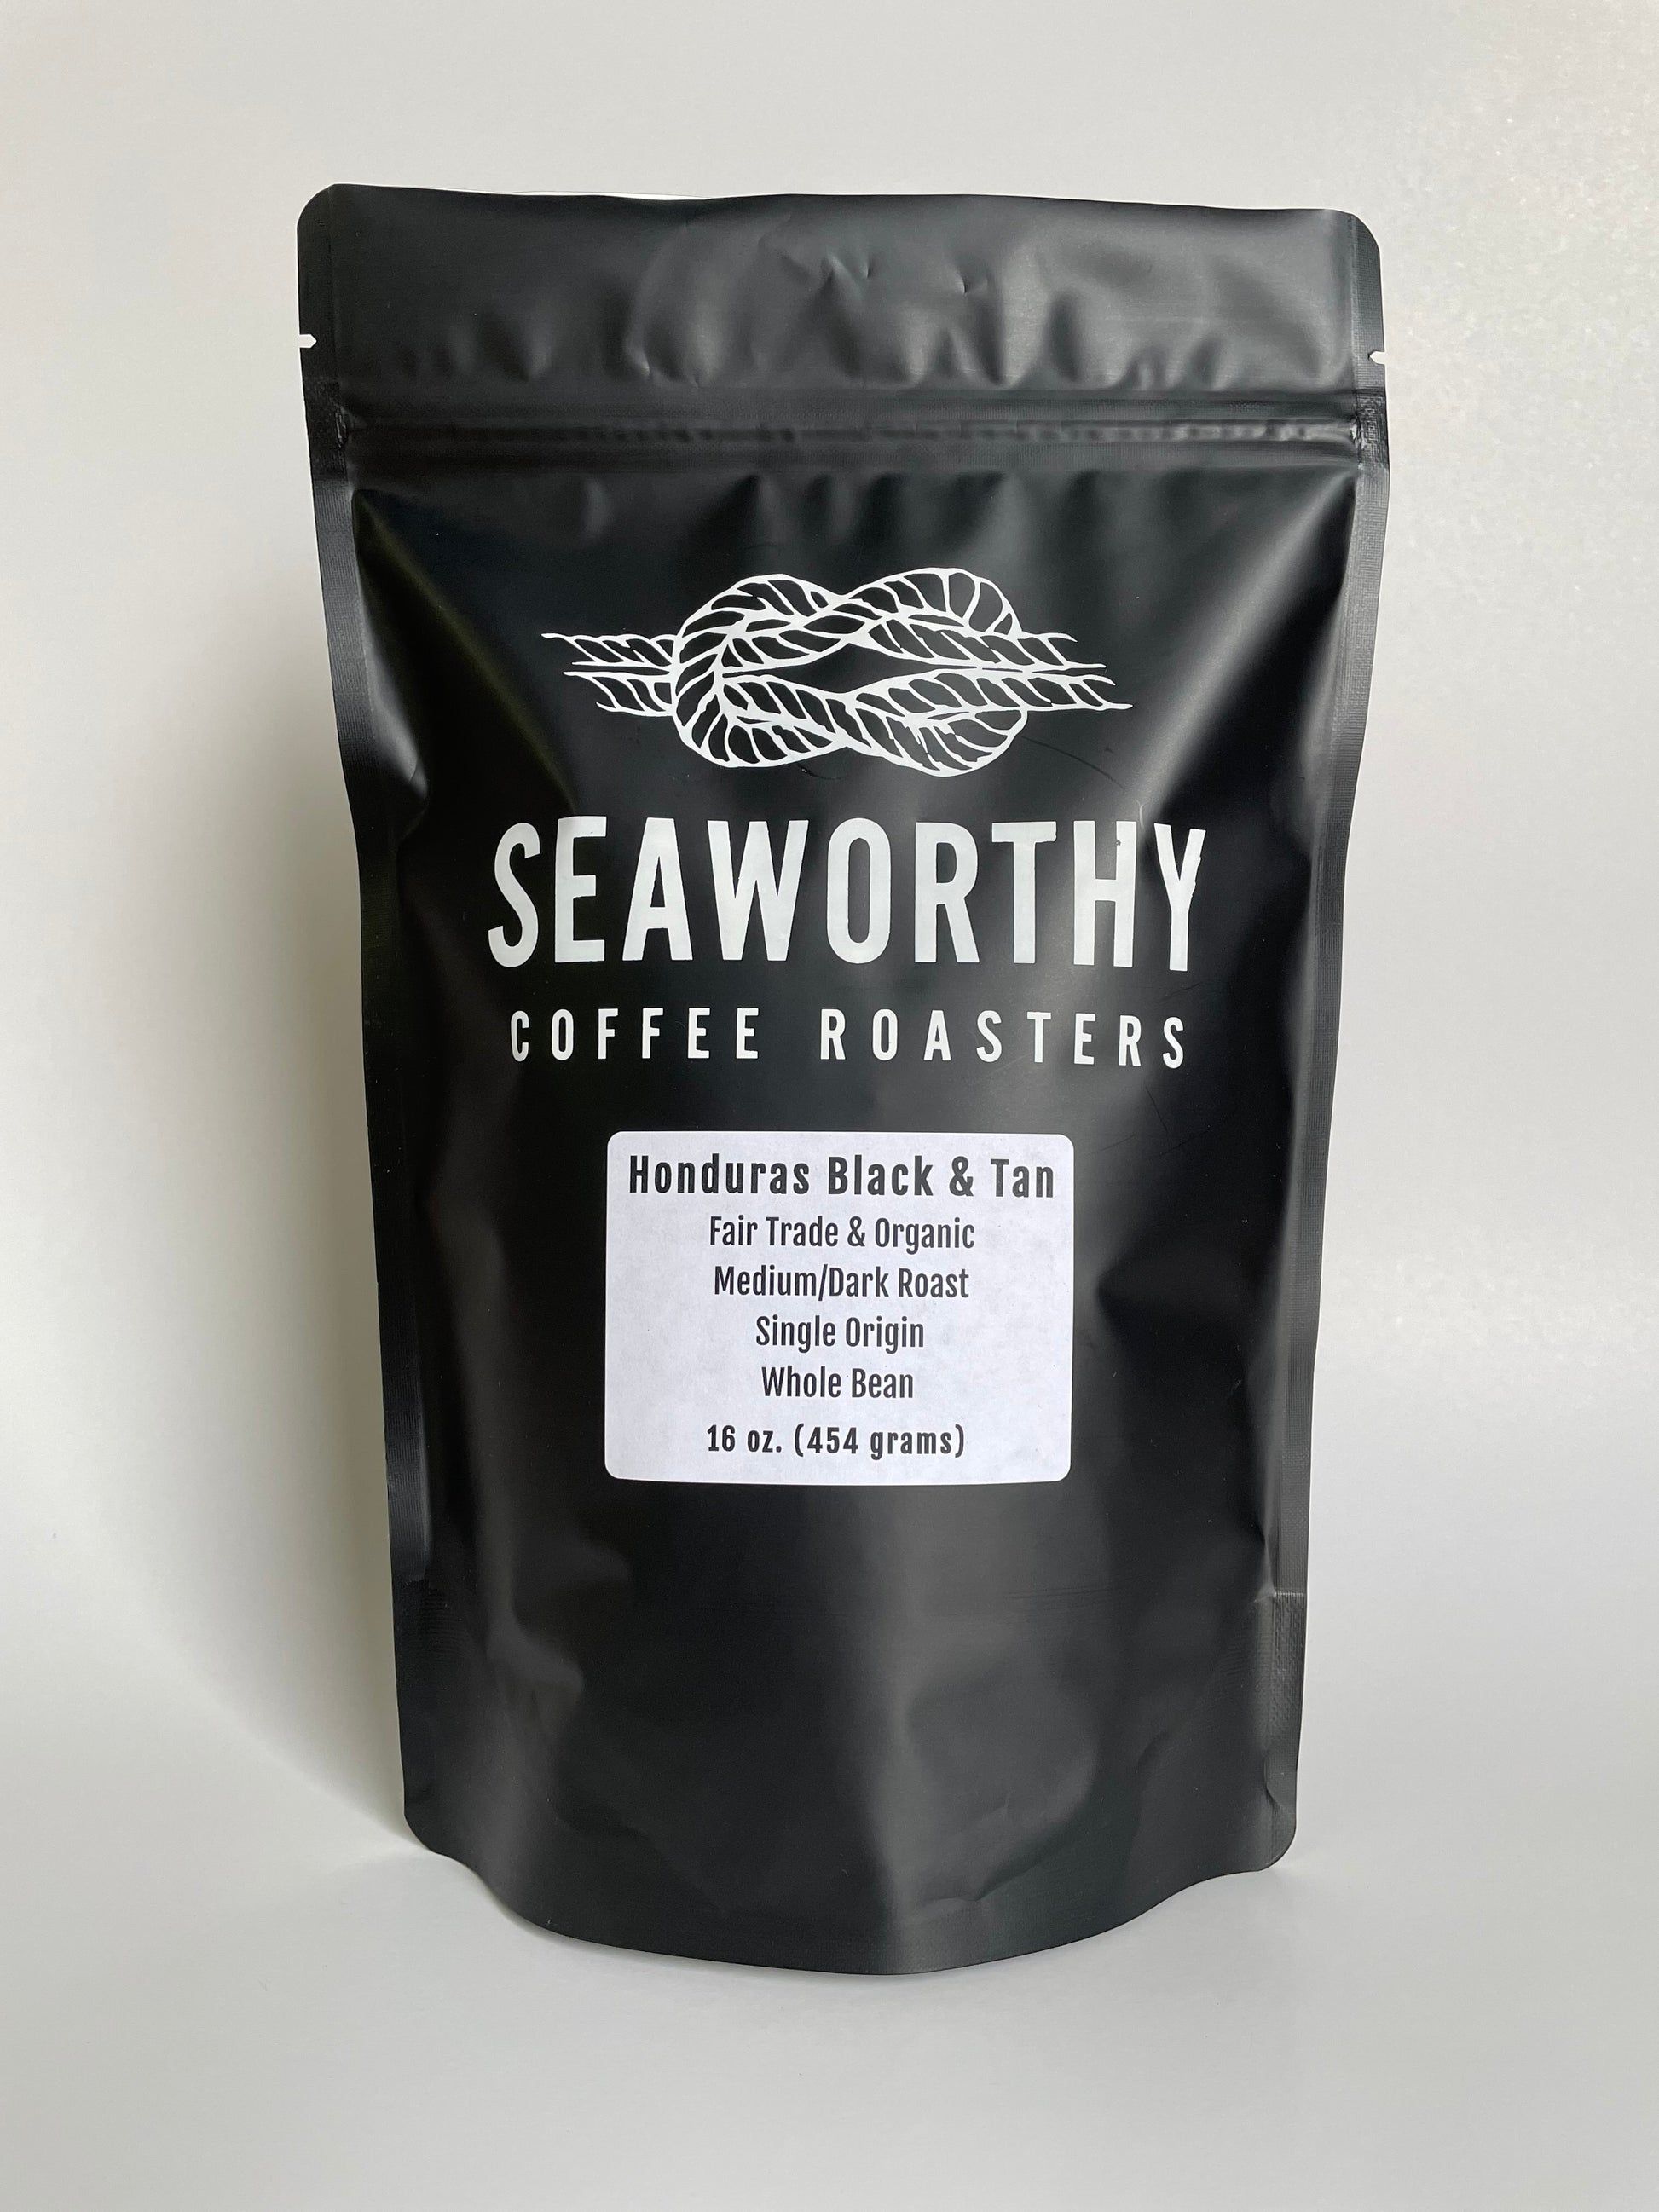 This roast is a mixture of medium and slightly darker medium roasted single origin Honduran coffee beans creating the unique "black and tan" appearance.  Notes of sweet milk chocolately goodness and subtle tones of stone fruit with a medium acidity and a lighter body make this an excellent cup of coffee.  